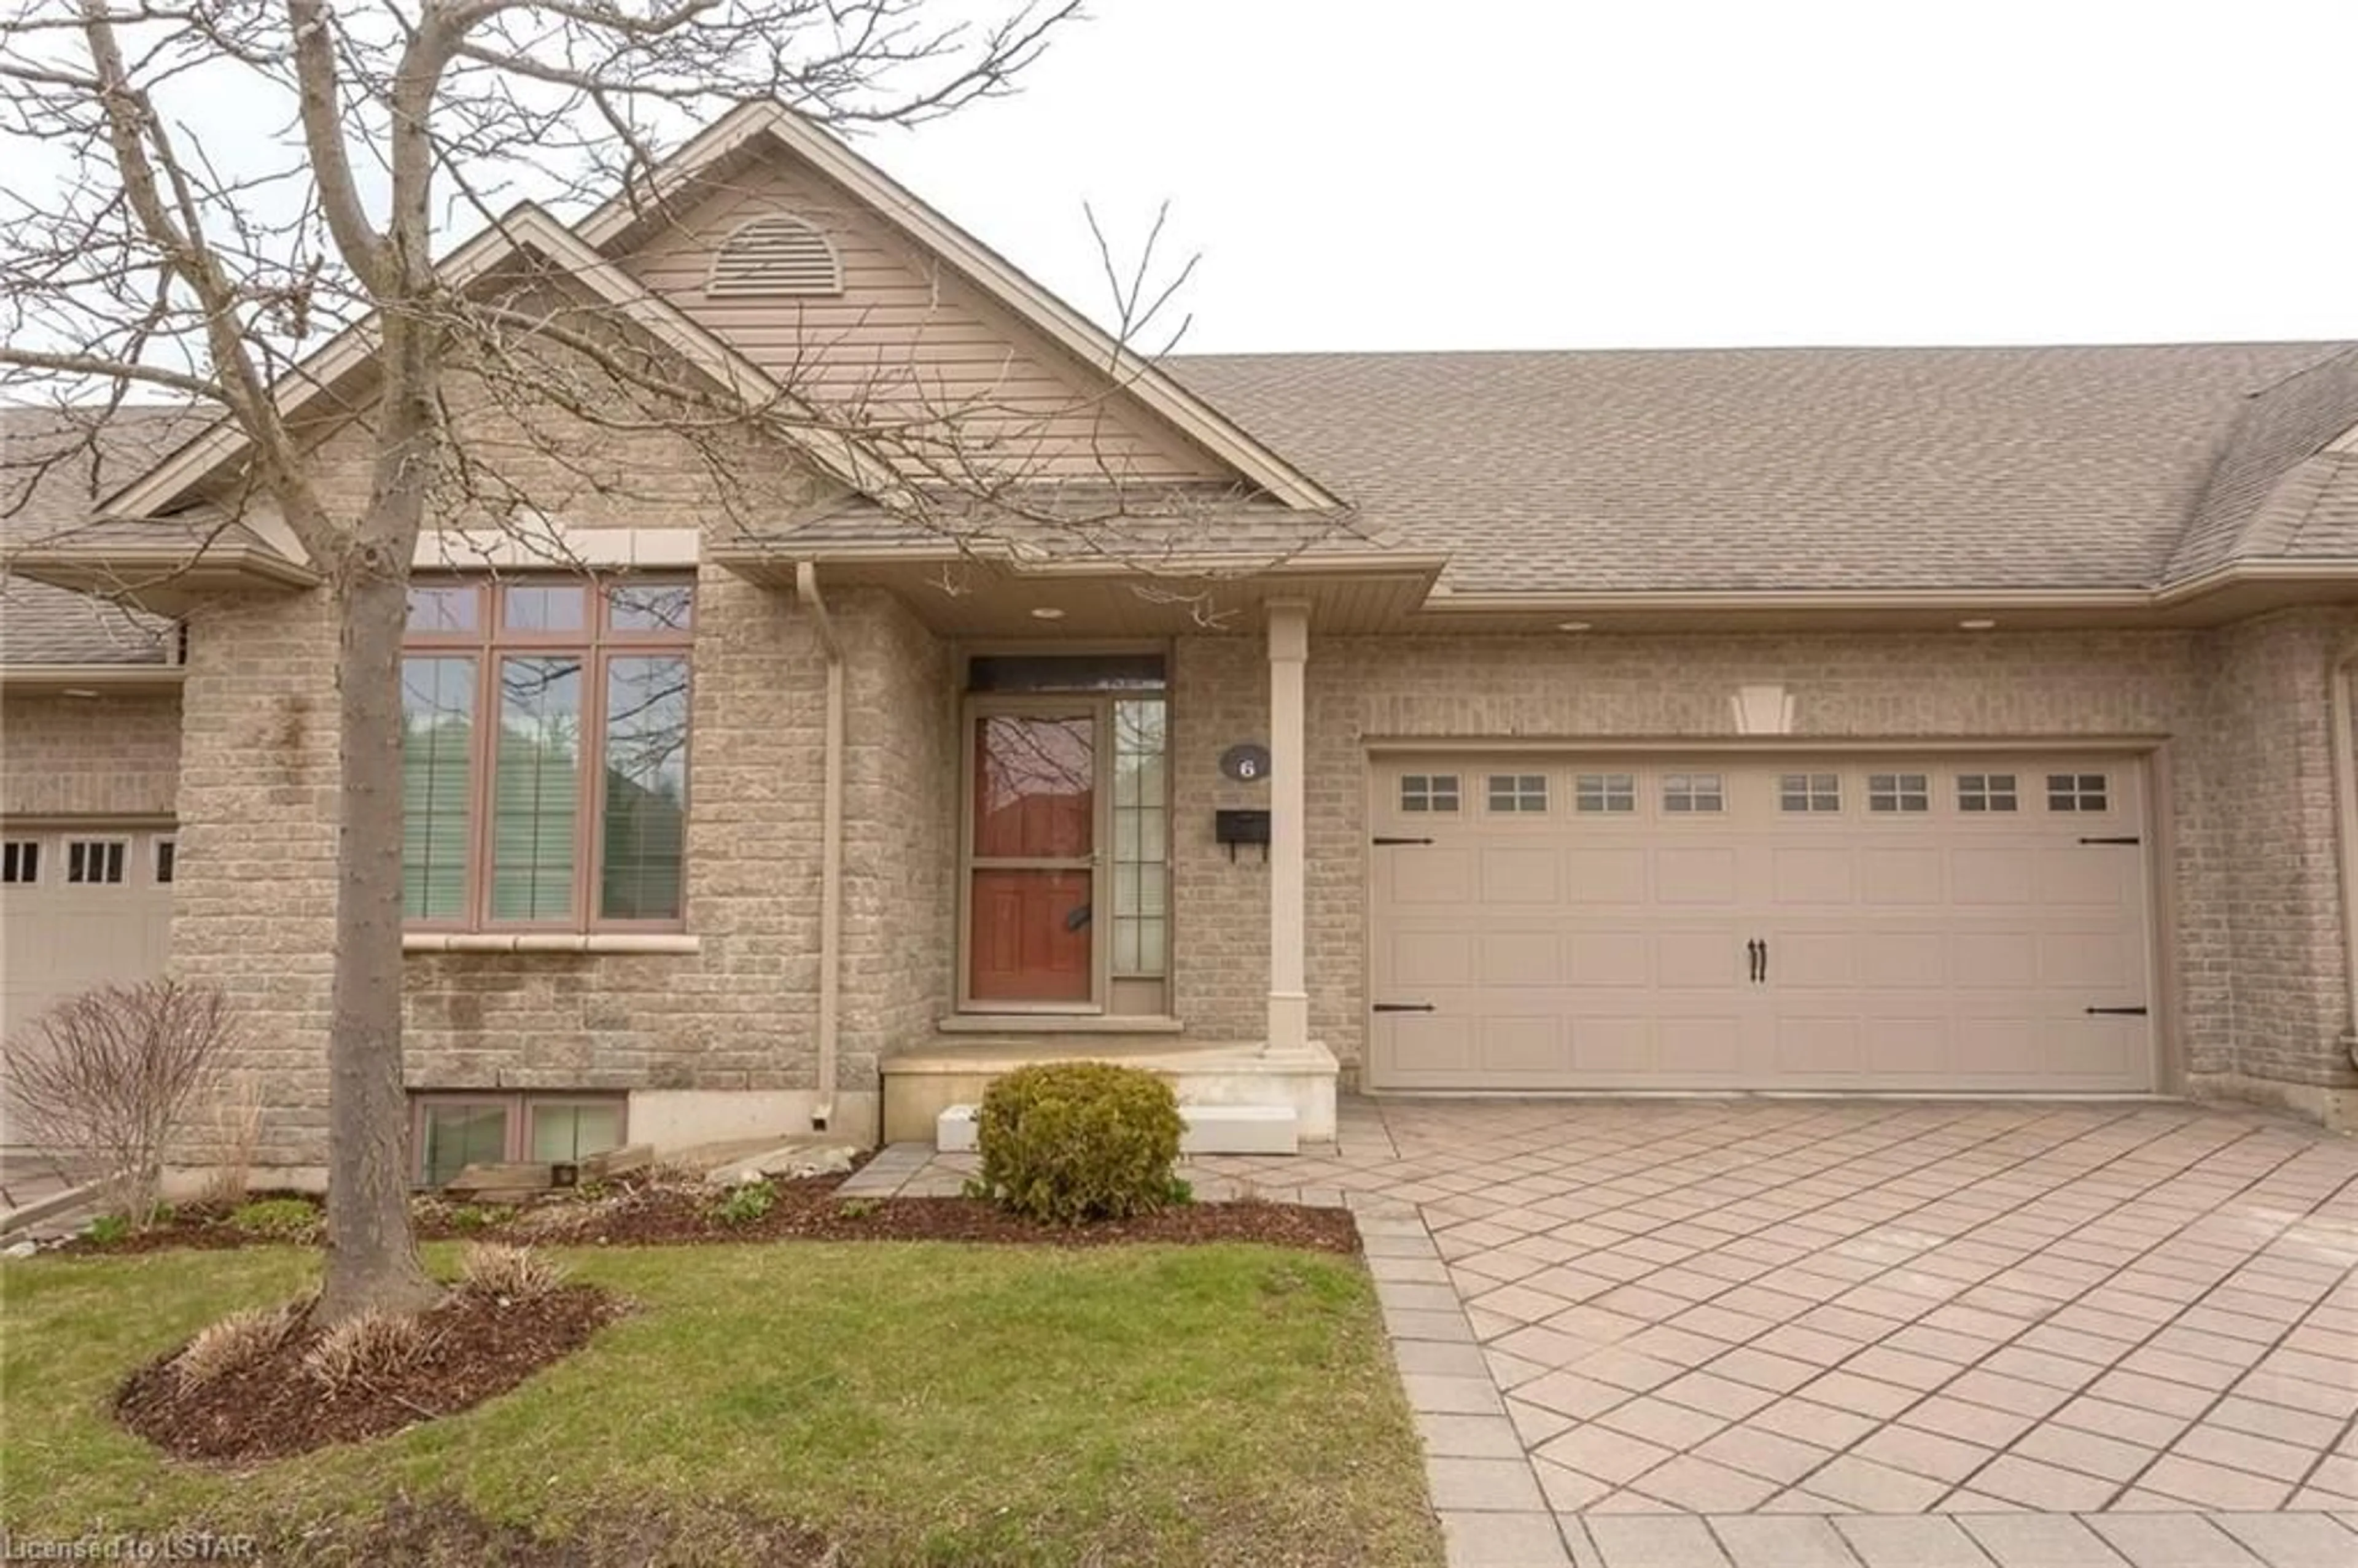 Home with brick exterior material for 2295 Kains Rd #6, London Ontario N6K 5E2